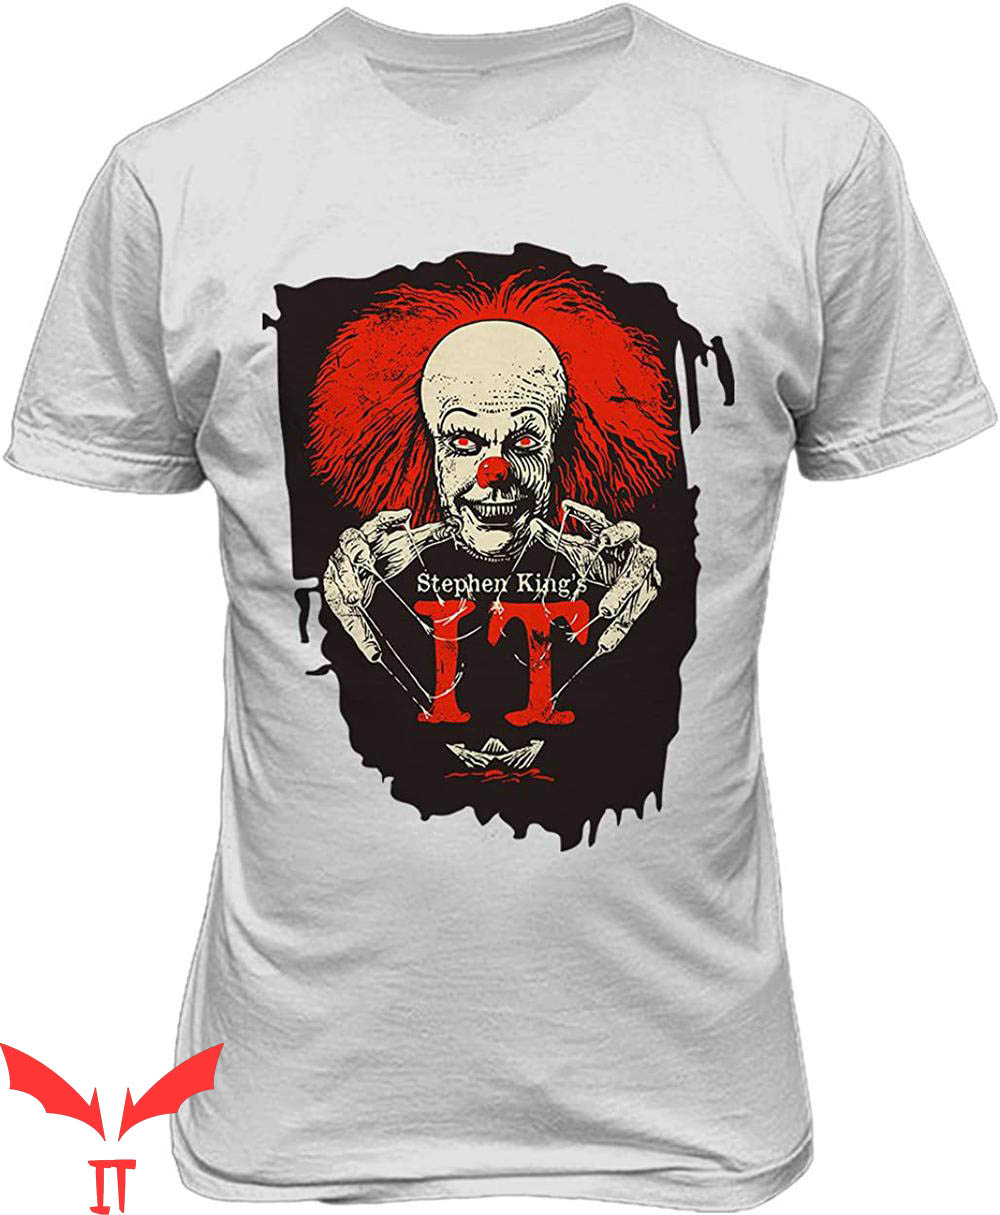 IT Pennywise T-Shirt Novelty Stephen King IT The Movie